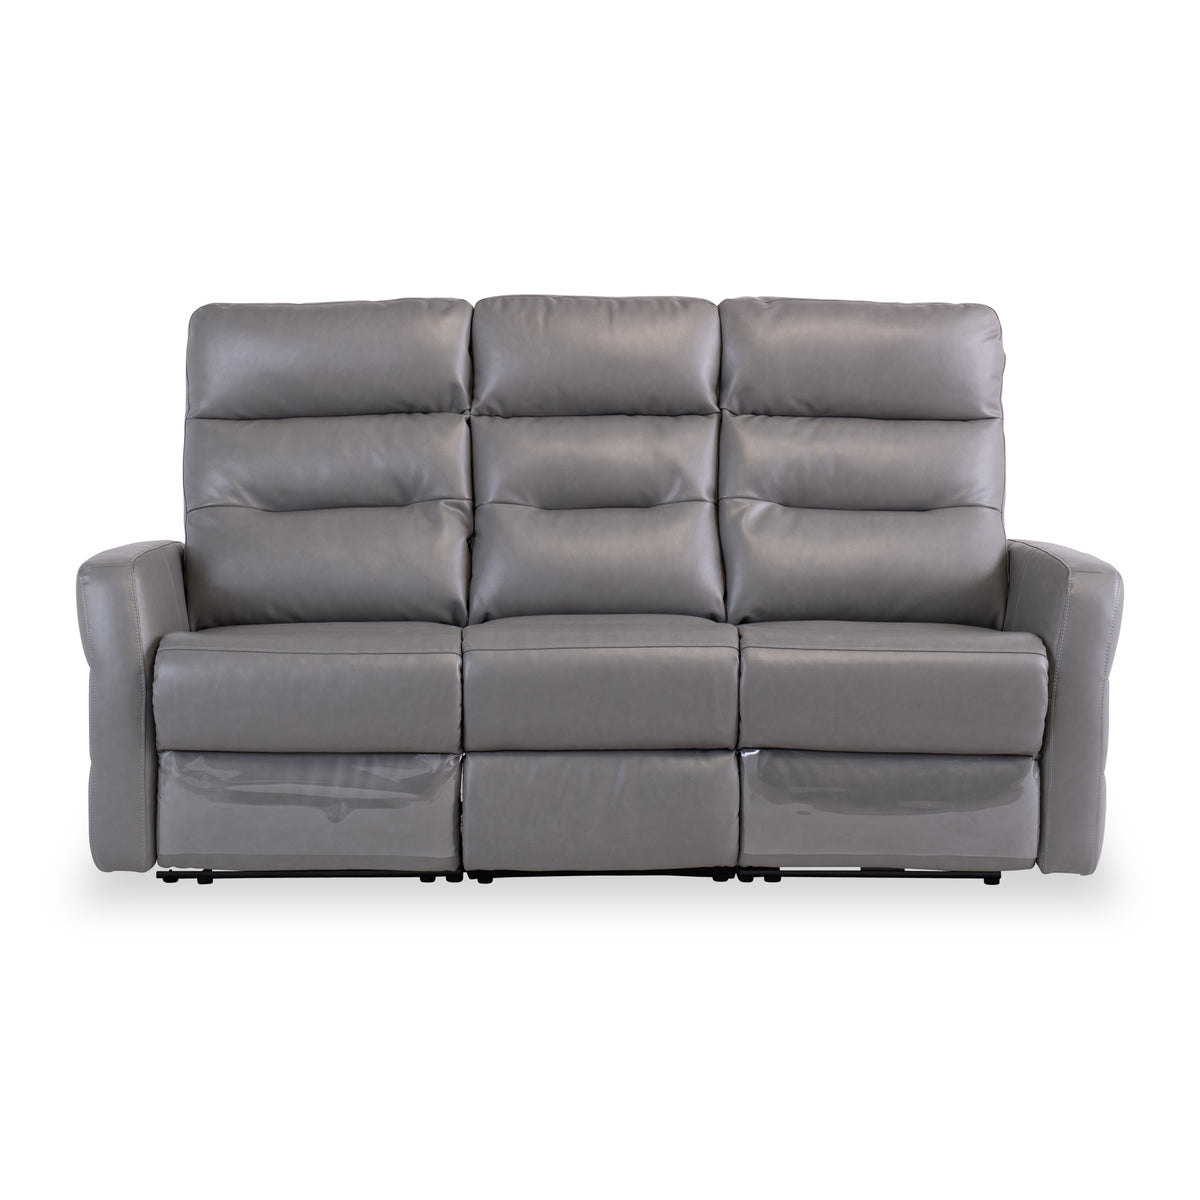 Harlem Grey Leather Electric Reclining 3 Seater Sofa from Roseland Furniture